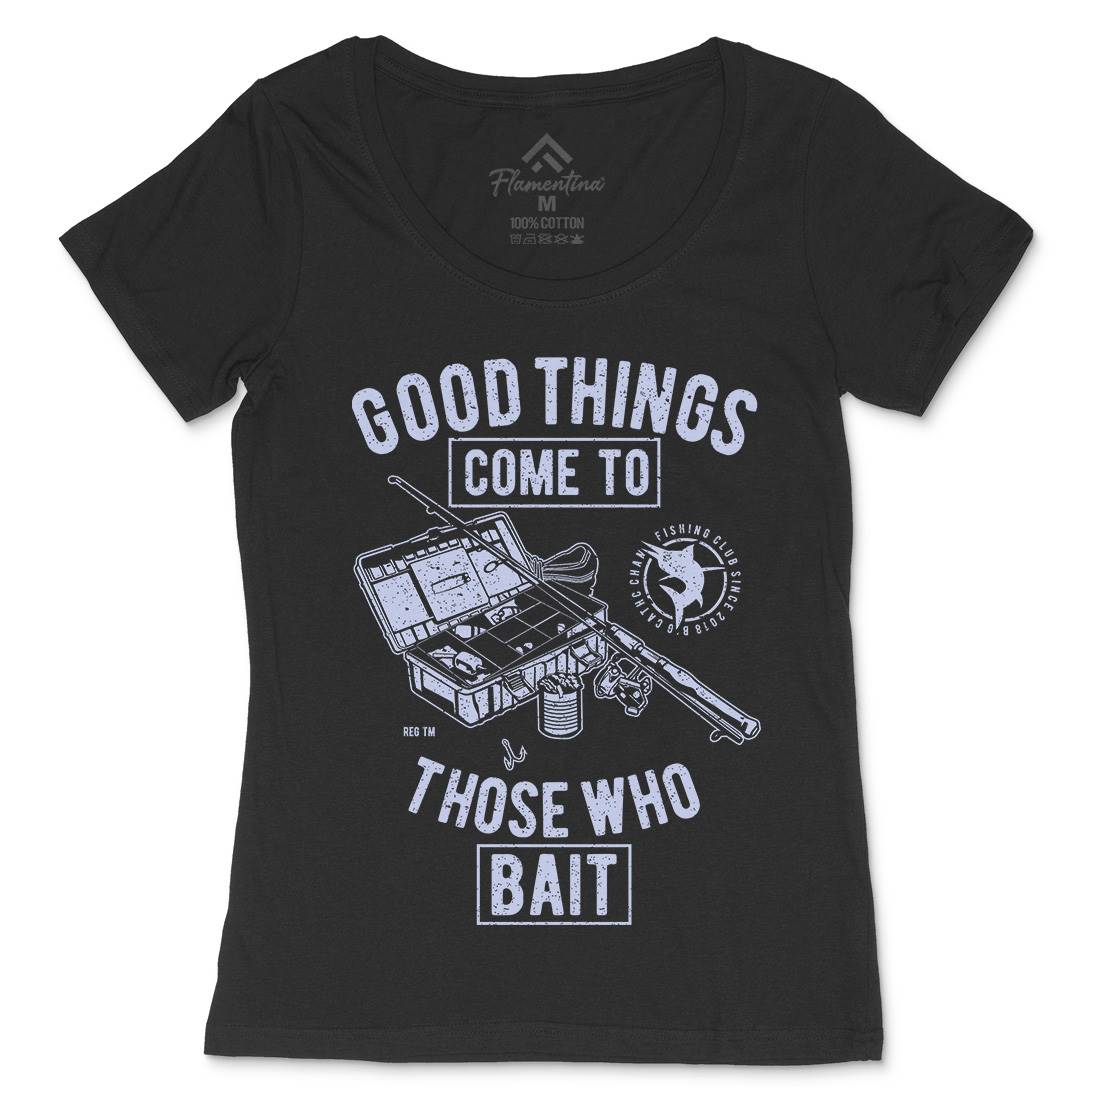 Good Things Womens Scoop Neck T-Shirt Fishing A677